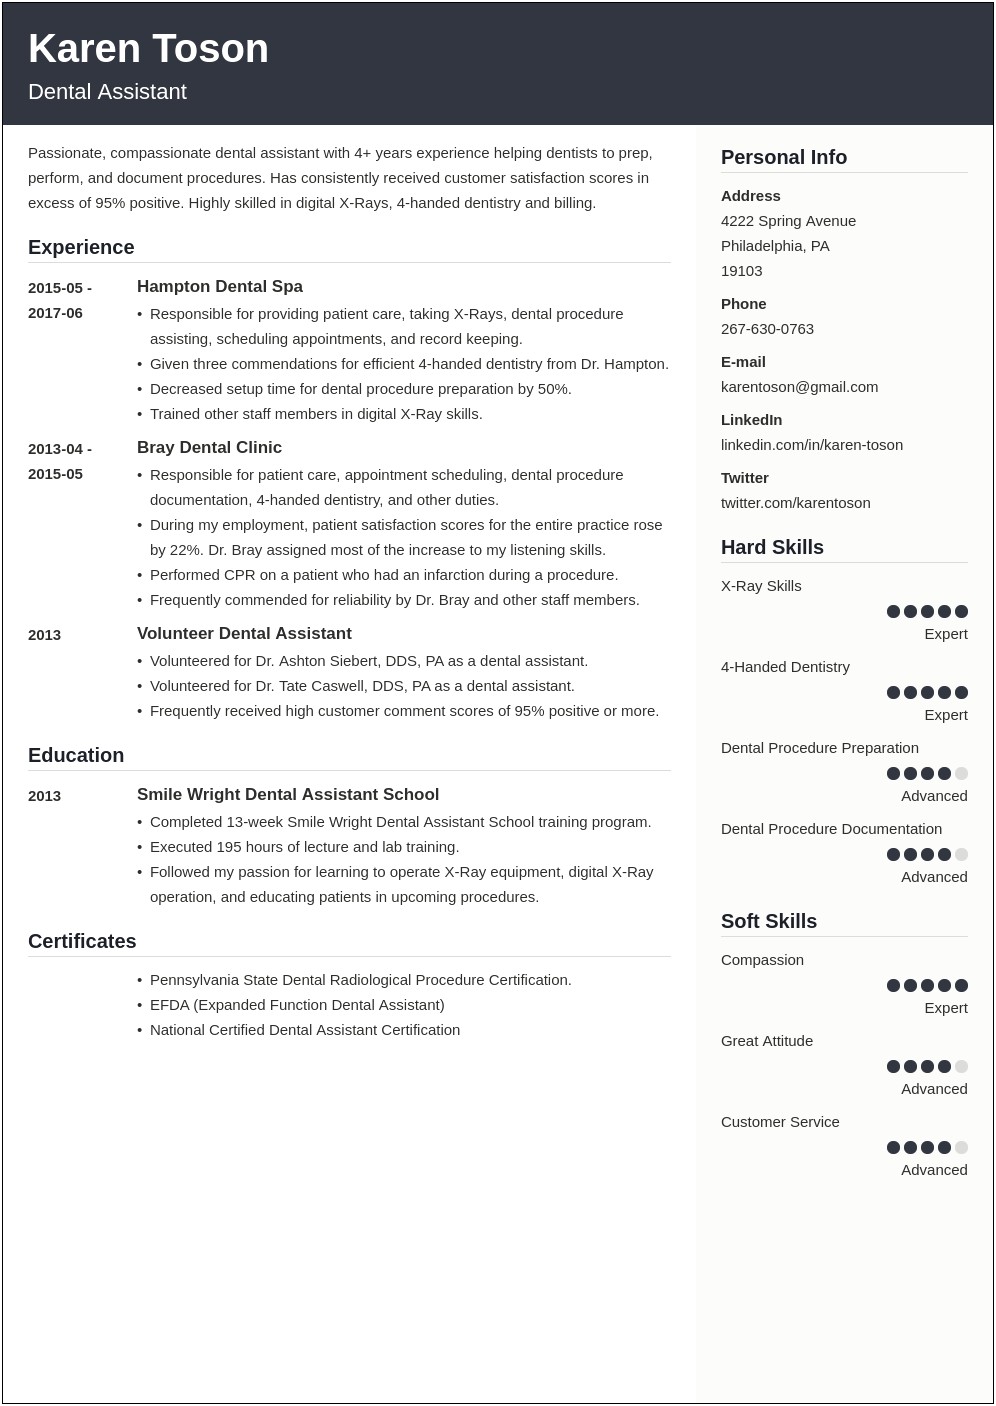 Brainstorming Resume Dental Assistant Objective Examples